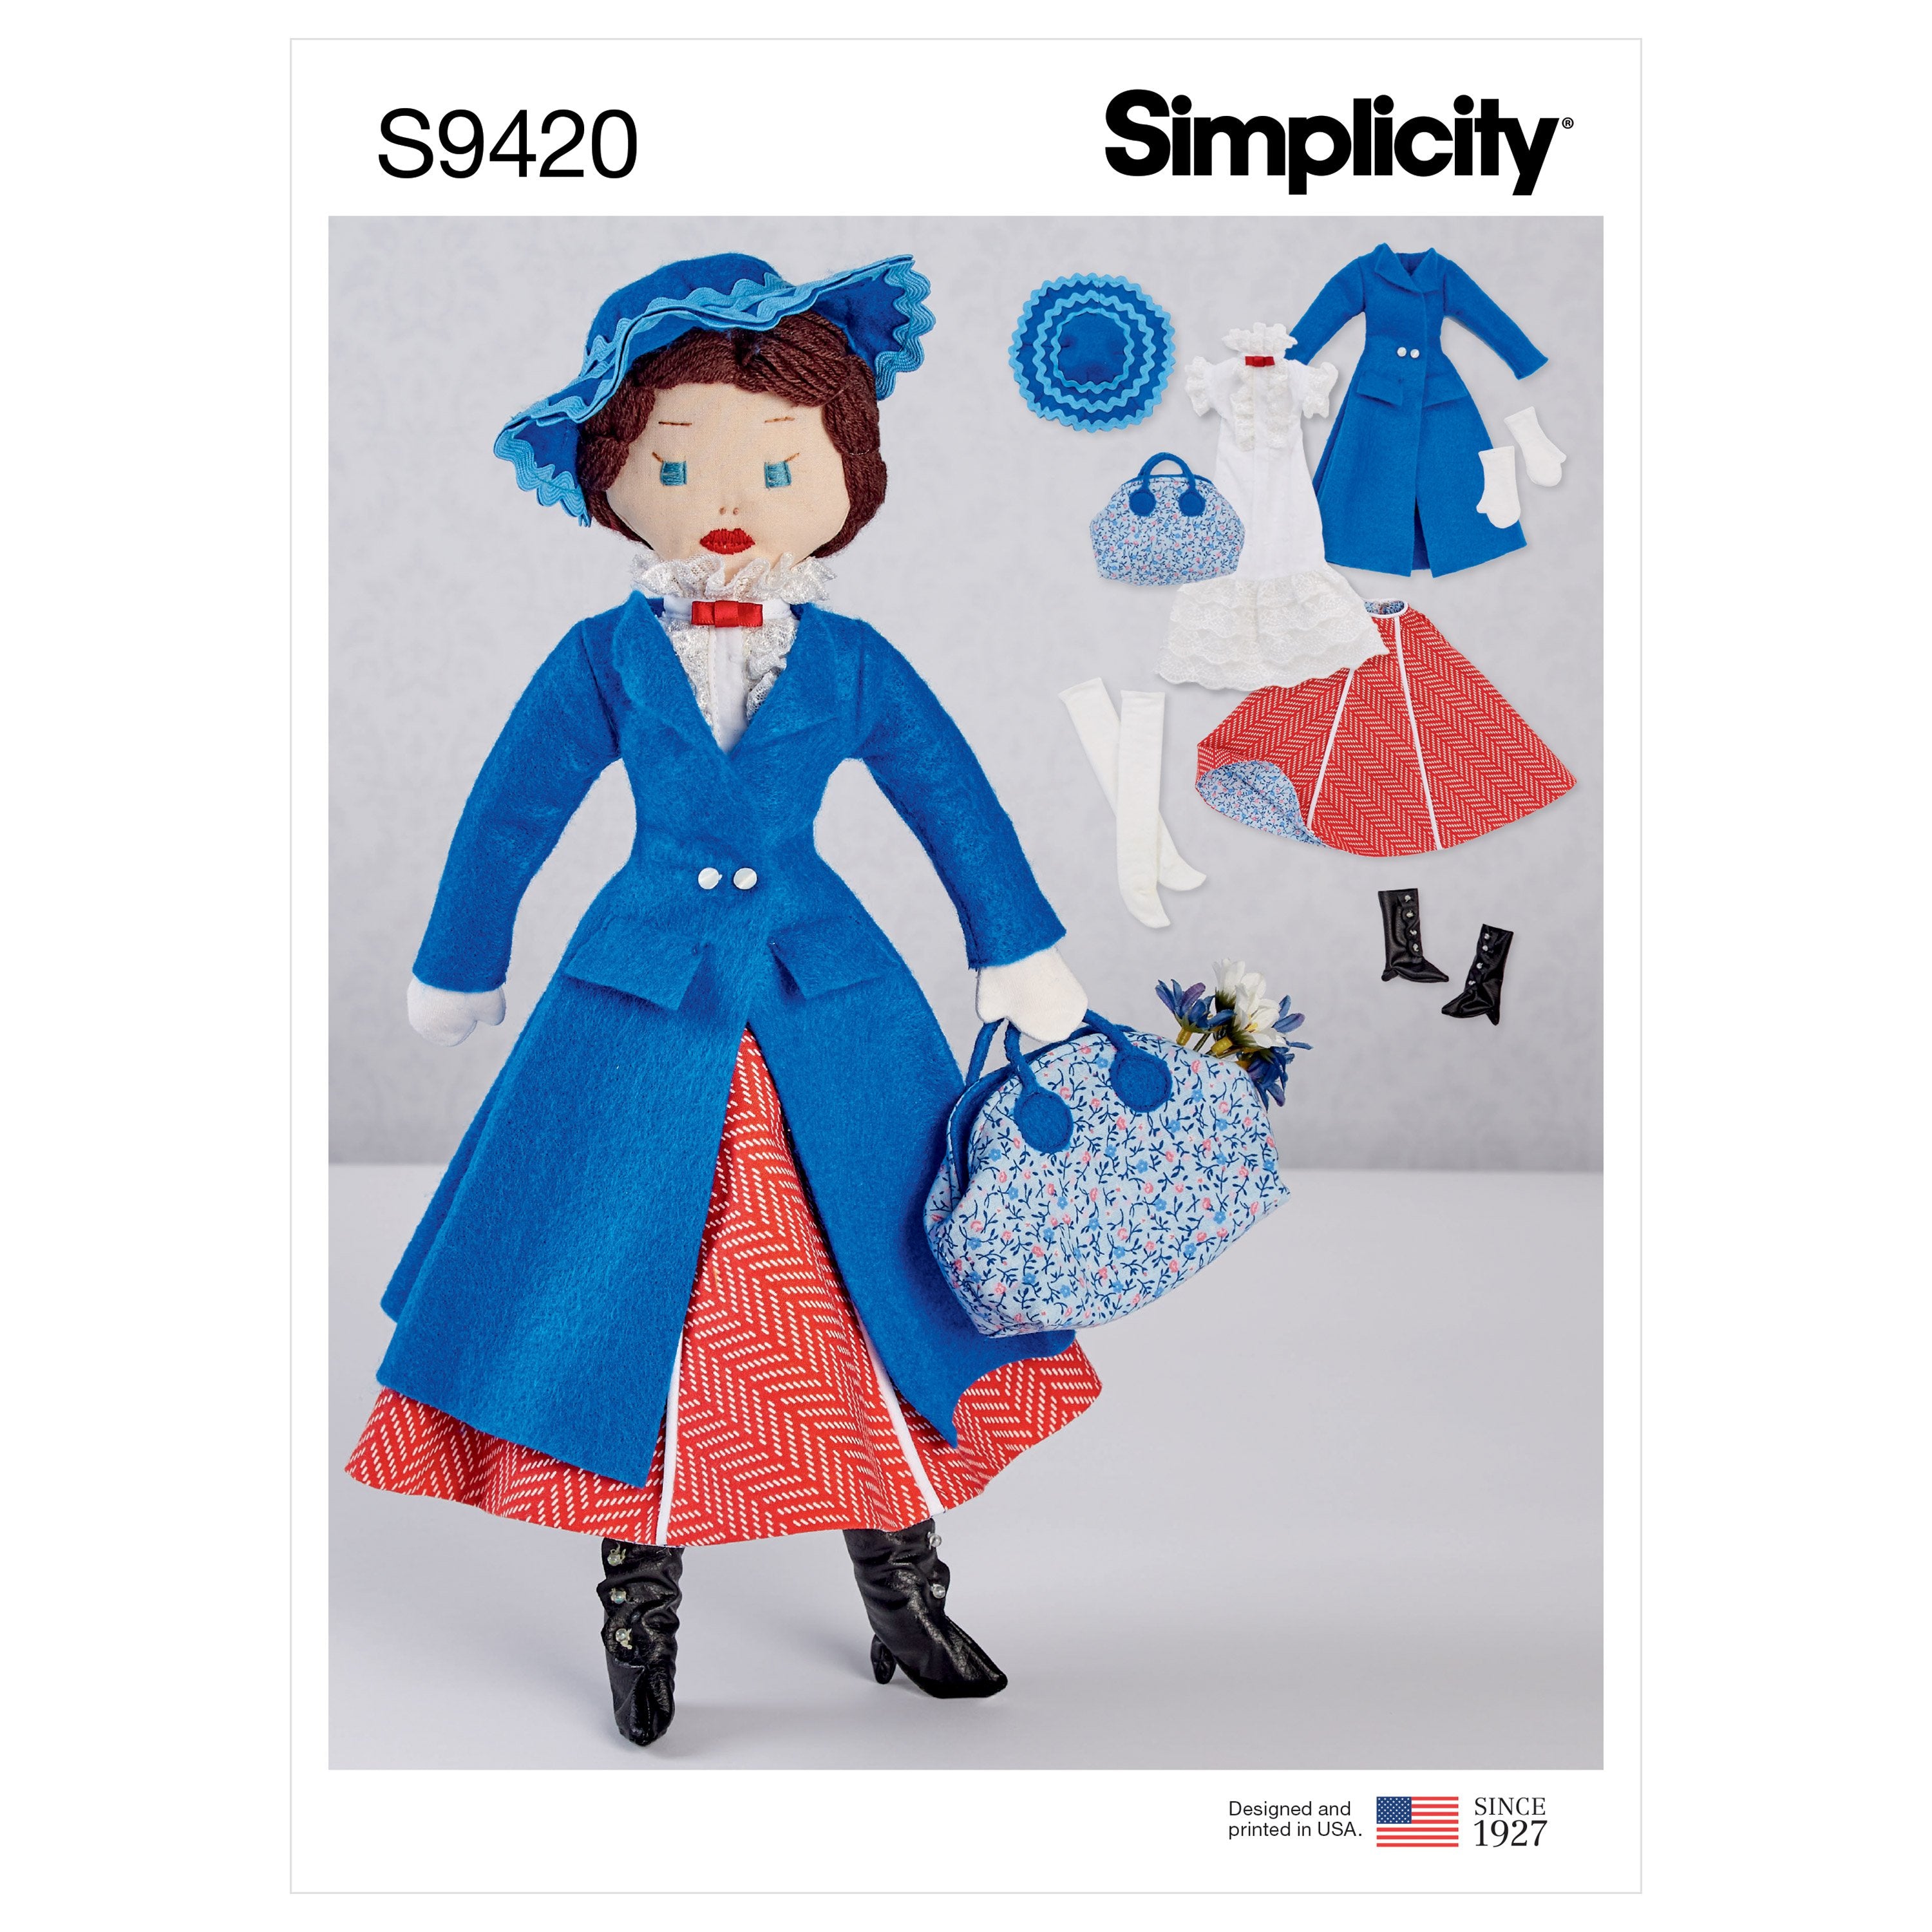 Simplicity Sewing Pattern 9420 17" Stuffed Doll and Clothes from Jaycotts Sewing Supplies